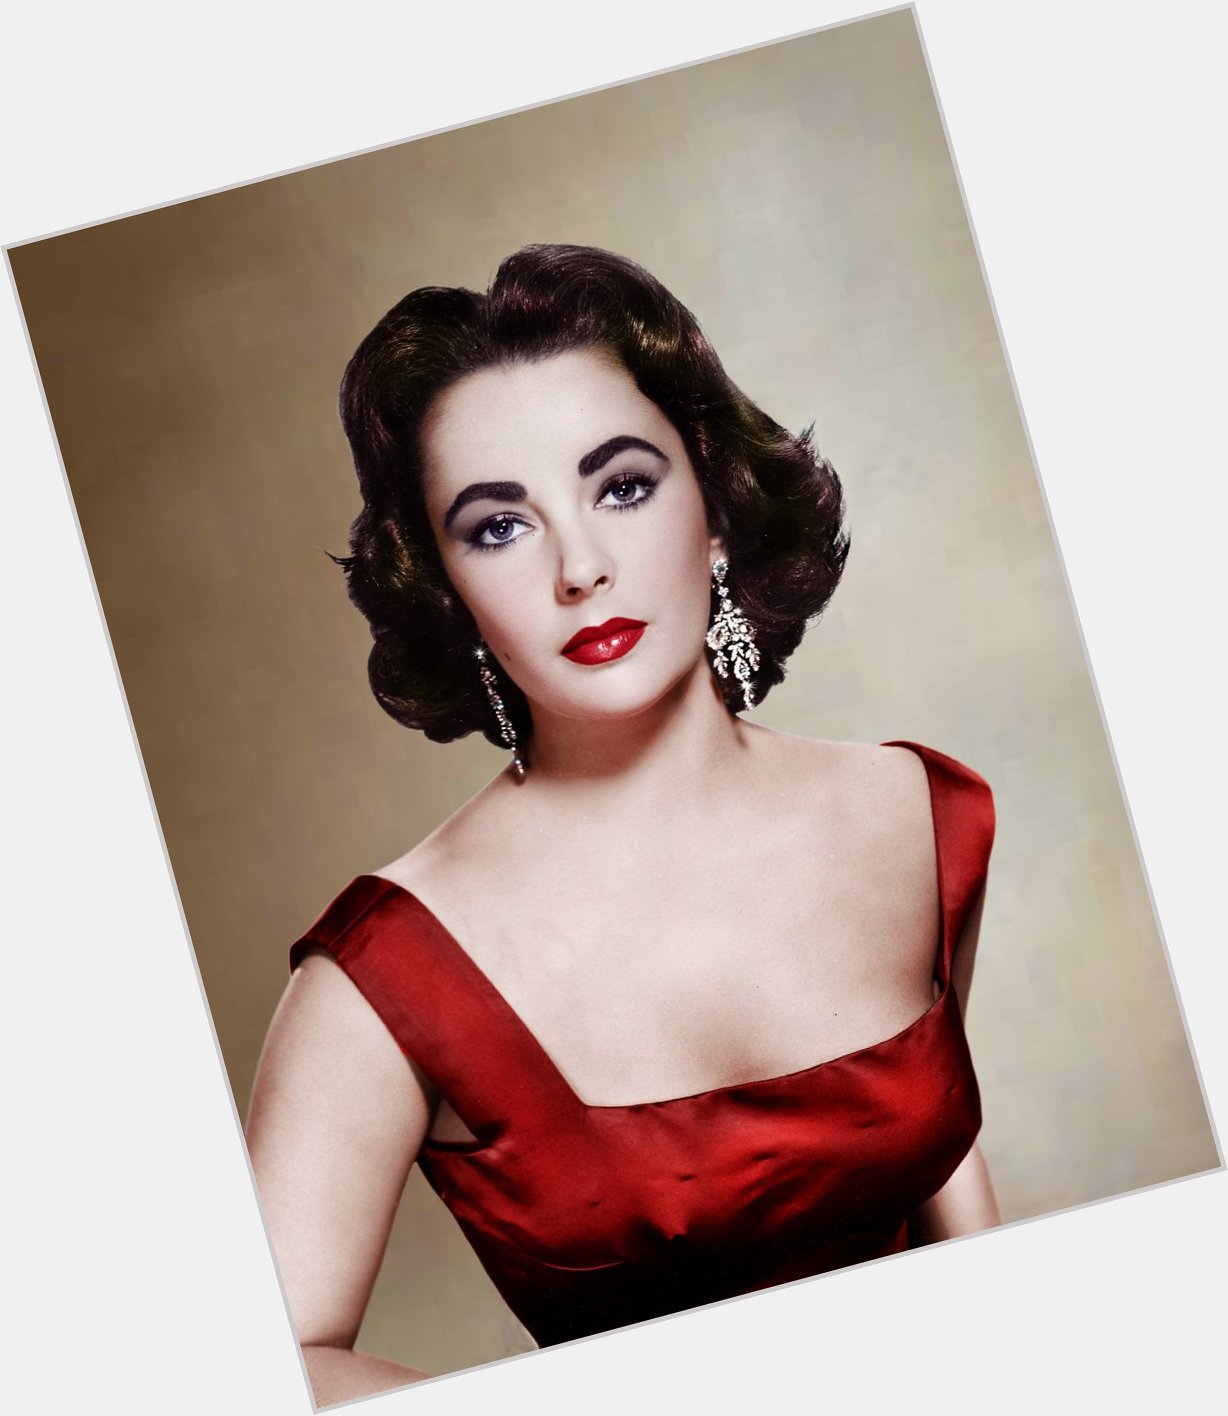 Happy Birthday to Elizabeth Taylor, who would have turned 85 today! 